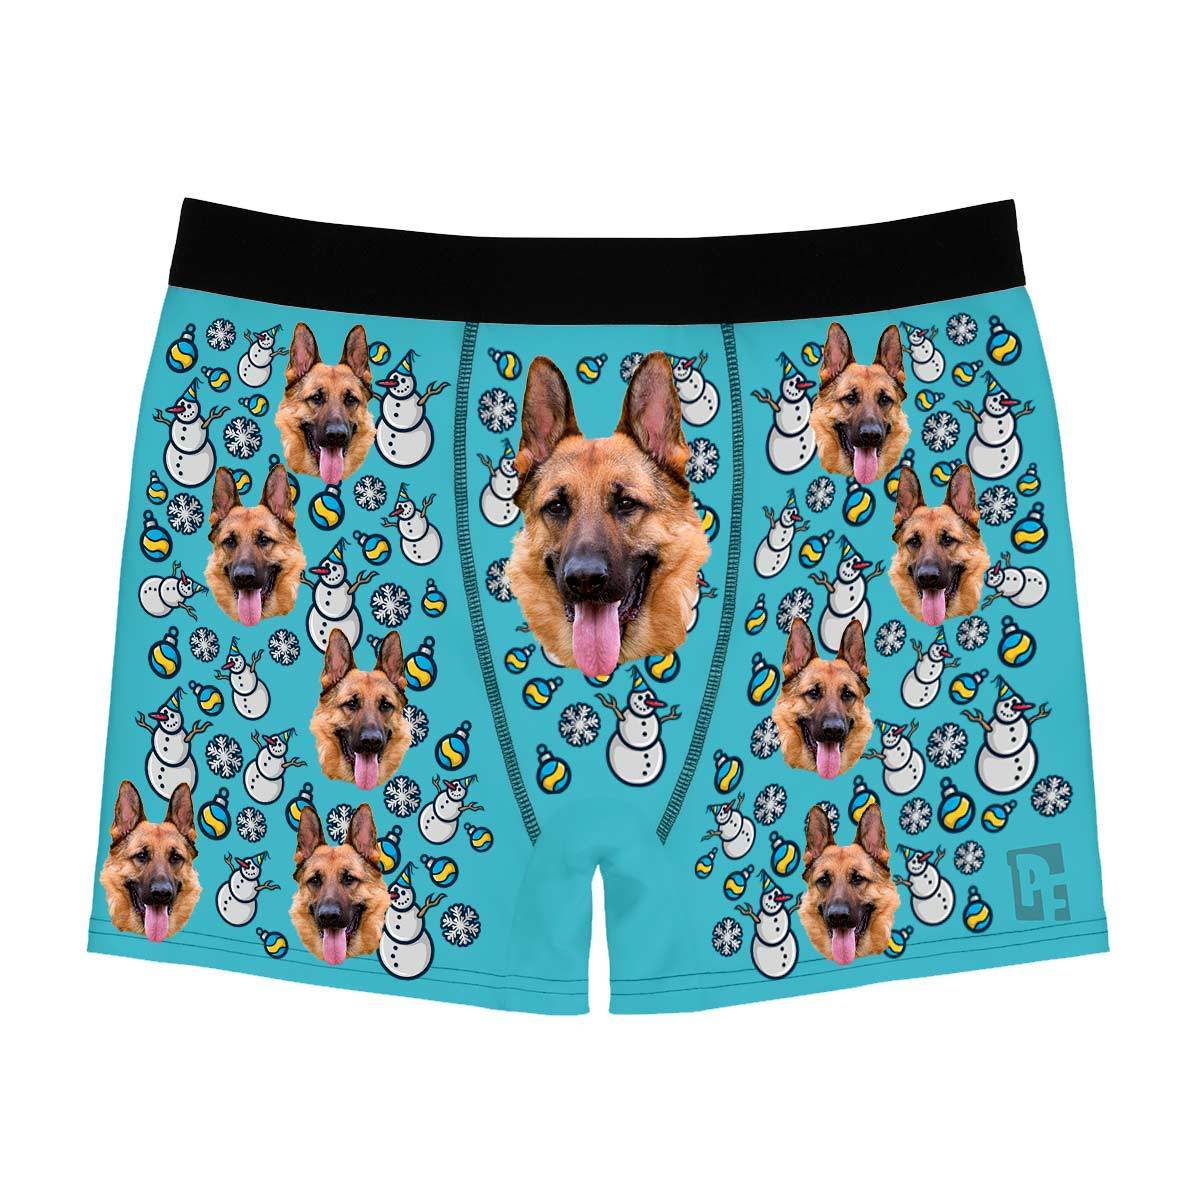 Blue Snowman men's boxer briefs personalized with photo printed on them